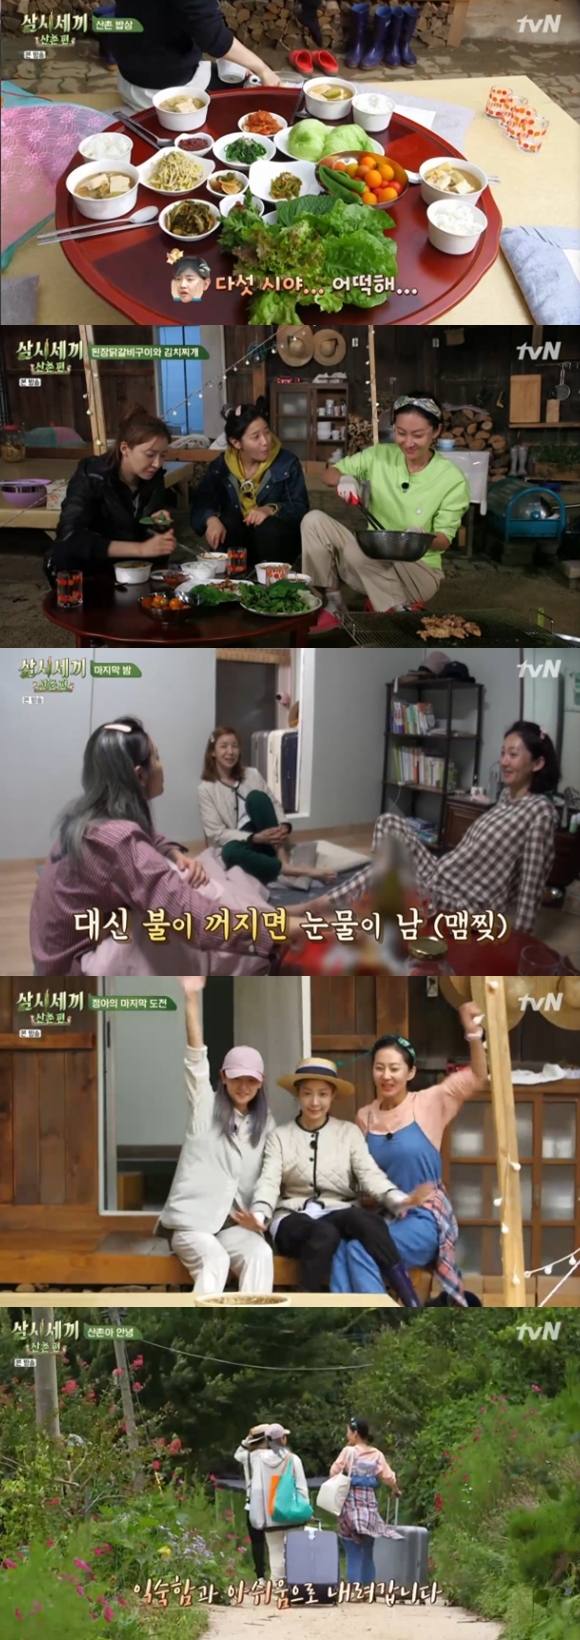 The mountain village life that started with the sunny summer ended with a chilly wind.On TVN Three Meals a Day - Mountain Village broadcast on the 18th, actors Yeom Jung-ah, Yoon Se-ah and Park So-dam were drawn to the end of mountain village life.The three families who returned to the three houses after seeing the chapter with guest Park Seo-joon started to eat ground to digest before preparing lunch.The bet was a lunch dishwasher, and for the penalty, the four decided to play the game as a personal match. So, Yeom Jung-ah showed anxiety, saying, I am the last person in the game.But surprisingly, Park So-dam took the last place in the dish-washing bet.As time went by, the four decided to have a lunch menu with a simple menu.But like the big hands of this area, Yeom Jeong-a, Yoon Se-ah, and Park So-dam are starting to increase their jobs.Park Seo-joon told Park So-dam, I have to give my guest an egg fries, saying, I think I can eat it at a rest area on my way.The four of them had been quick to cook, but their lunch was not completed until 5pm.Park Seo-joon was ready to go up to Seoul after eating mountain village table with all kinds of vegetables.I will keep jumping rope, he said to Park Seo-joon, who is leaving the three houses.Park So-dam said, I feel like sending a army. He sent Park Seo-joon to the car with Yeom Jung-ah and Yoon Se-ah.The three people, who had been resting for a while after Park Seo-joon left, opened the Salt Grill Grill on the evening of cold wind.The last dinner menu of the three people was miso chicken ribs grilled and miso stew.Is it too much to be called? He said, Do not eat tomorrow morning, and he told the production team, Do not eat tomorrow morning.Park So-dam, who once tasted kimchi stew, admired it, saying, You have to eat rice.After seeing the taste, Yeom Jung-ah said, We have to solve the waist. In particular, Yeom Jung-ah hand-baked chicken ribs to the crew who had been harassing him with rope skipping all morning.On the last night in the mountain village, the three of them lay in their rooms and recalled their life in the mountain village, and all three of them said, I am not afraid of cooking anymore.Park So-dam laughed, saying, Now, even if you fire, you do not tears. If you turn off instead, you will tears.The three of them had always opened their last morning with fresh bean coffee, especially the espresso ice that Park So-dam had frozen in advance.The last meal of the three-kili family was steamed pork ribs and bizi stew, which was filled with a cupratte that was not often seen in the mountain village and prepared for breakfast.As the four-time living in a mountain village, the three people prepared their meals in a row. As a main chef, Yeom Jung-ah simulated the image and started cooking in earnest and completed the table.Park So-dam has left a picture of a mountain village table as he has always done.After the last meal, Na Young-seok PD made a fascinating proposal to the three people who started the rear-end cleanup with regret behind them: If Yeom Jeong-ah succeeds in jumping rope, he will replace the last dishwasher.Yeom Jung-ah grabbed the line, saying, If you can not do the dishes, you should do the dishes. And as if you were watching, you succeeded in jumping rope 25 times at a time and surprised the crowd.Surprised by his unexpected success, he was thrilled that he was boxing like this.While I PD sat on the tap and did the last dishwashing, the three people piled up memories by taking pictures in the background of the three houses.On the other hand, the three families who met with the production team in Seoul after living in the mountain village were impressed by the album gift prepared by the production team.And the crew said, This is the real gift. Three people handed cabbage planted in the field in the mountain village.Yeom Jeong-a, Yoon Se-ah, and Park So-dam looked very impressed, no matter what you are.Three Meals a Day - Mountain Village, which presented healing to viewers every Friday night, will end, and next Friday at 9:10 pm on tvN, Shin Seo-yugi 7 - Homecoming will be broadcast.Photo: TVN Three Meals a Day - Mountain Village broadcast screen capture